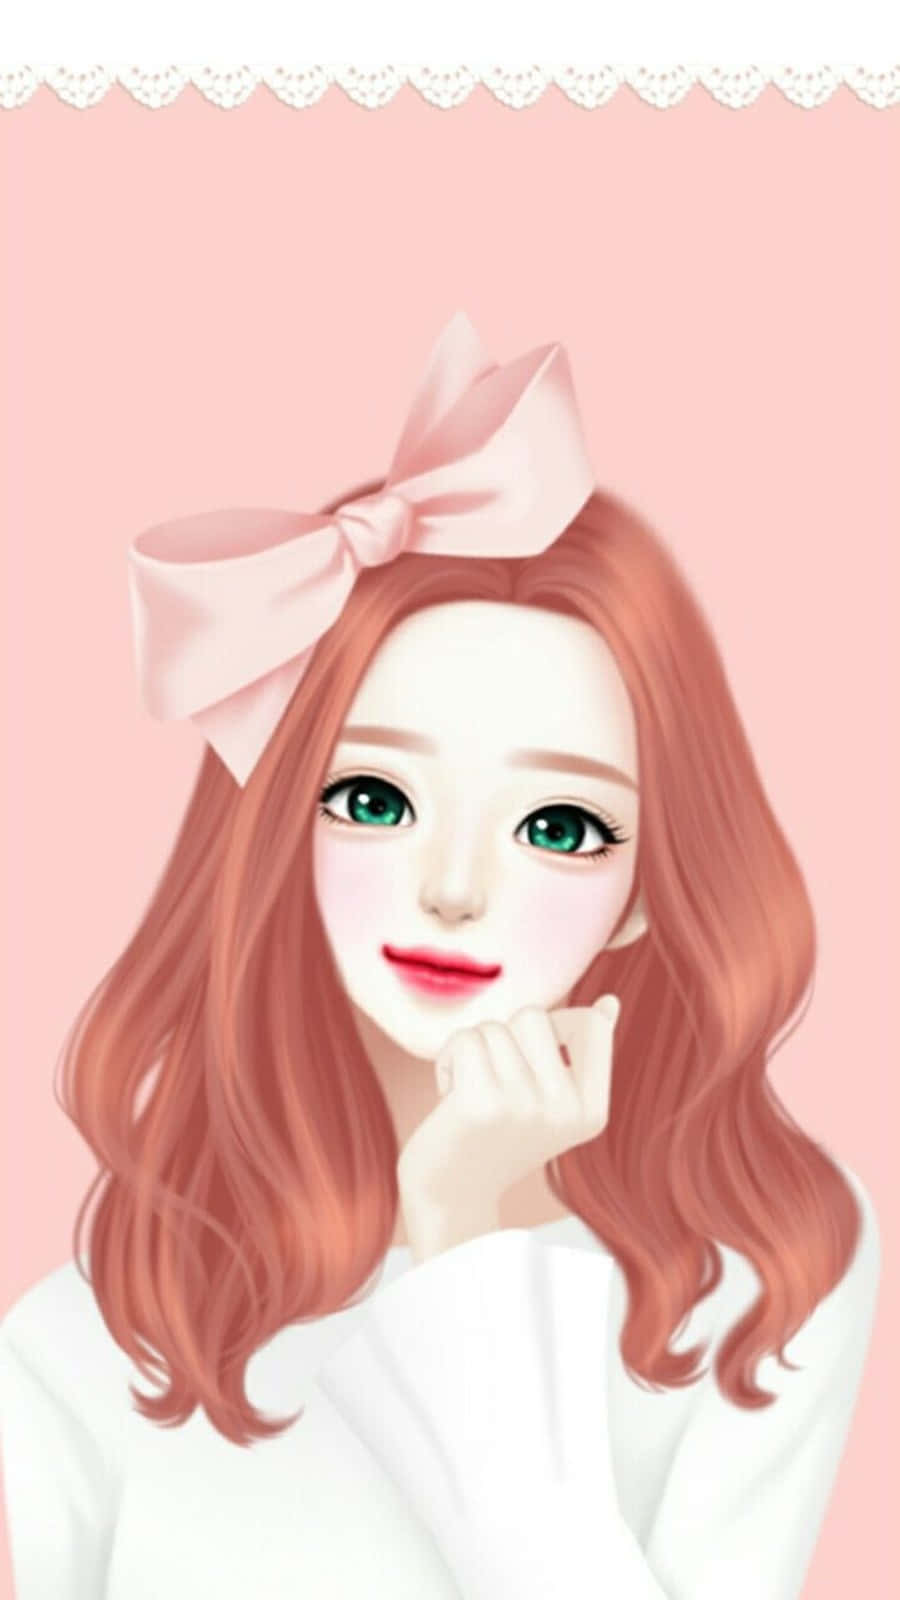 Korean Anime Girl With Pink Bow On Head Wallpaper